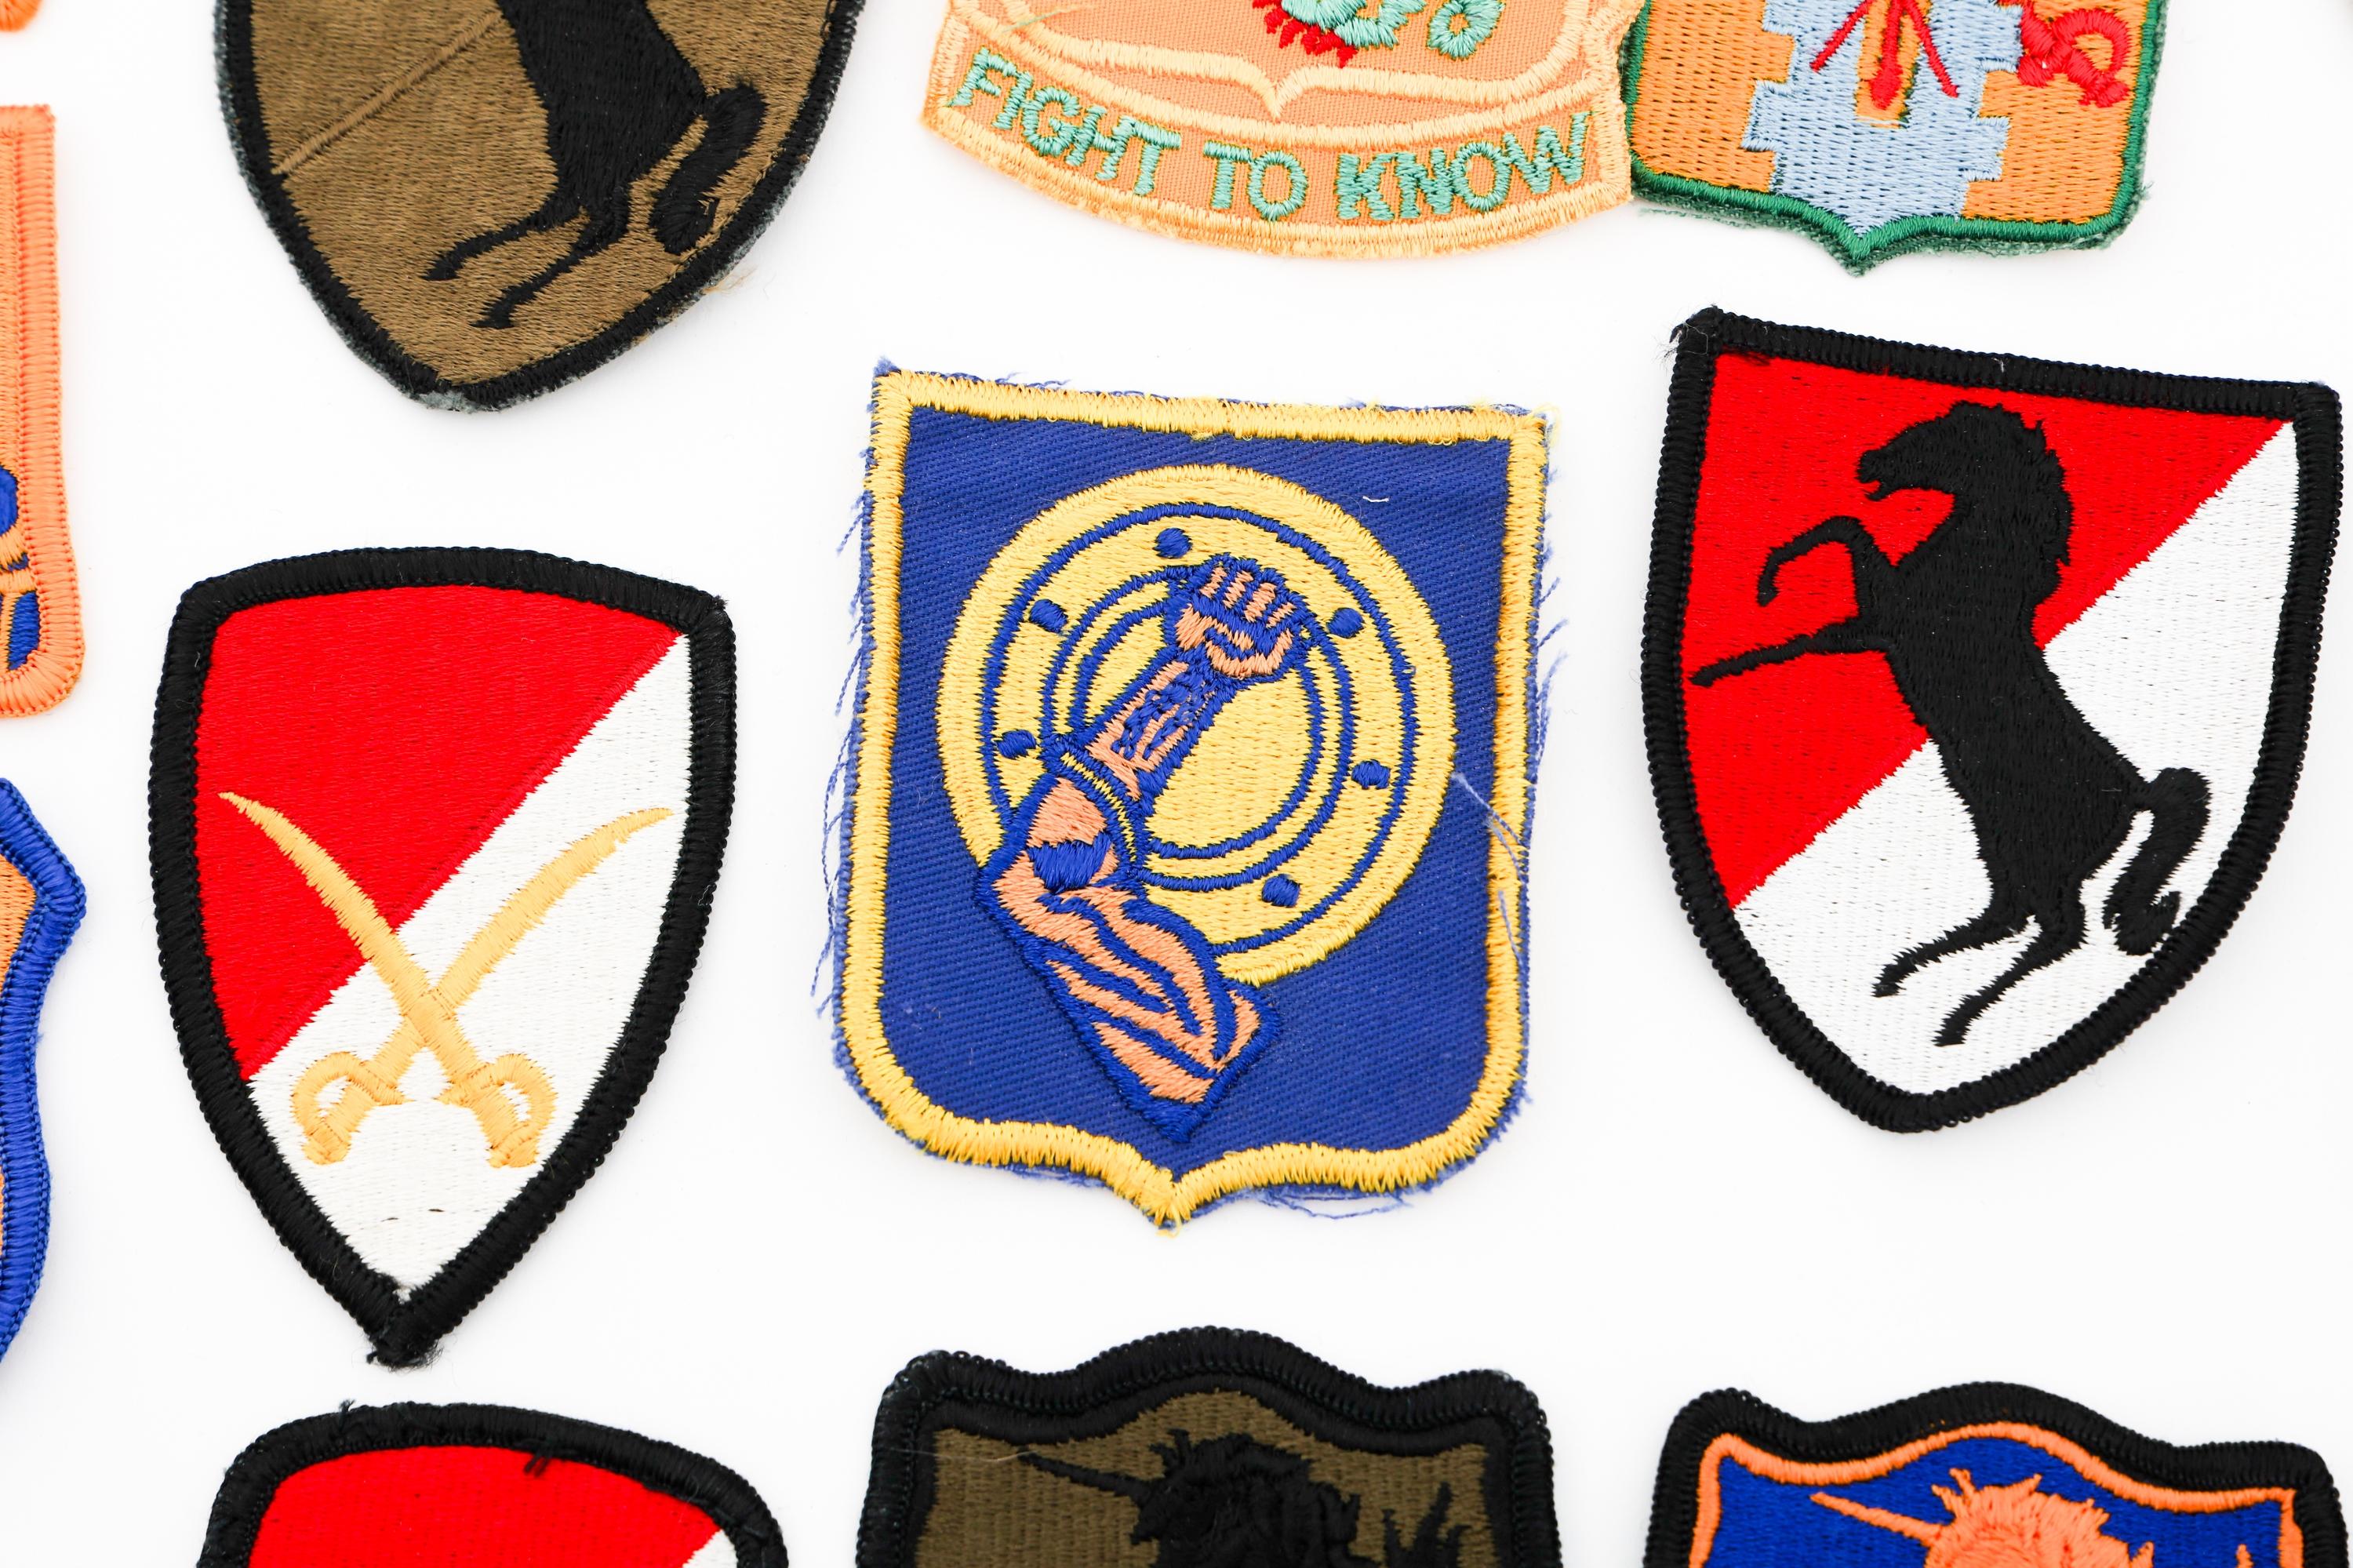 COLD WAR US ARMY CAVALRY UNIT PATCHES